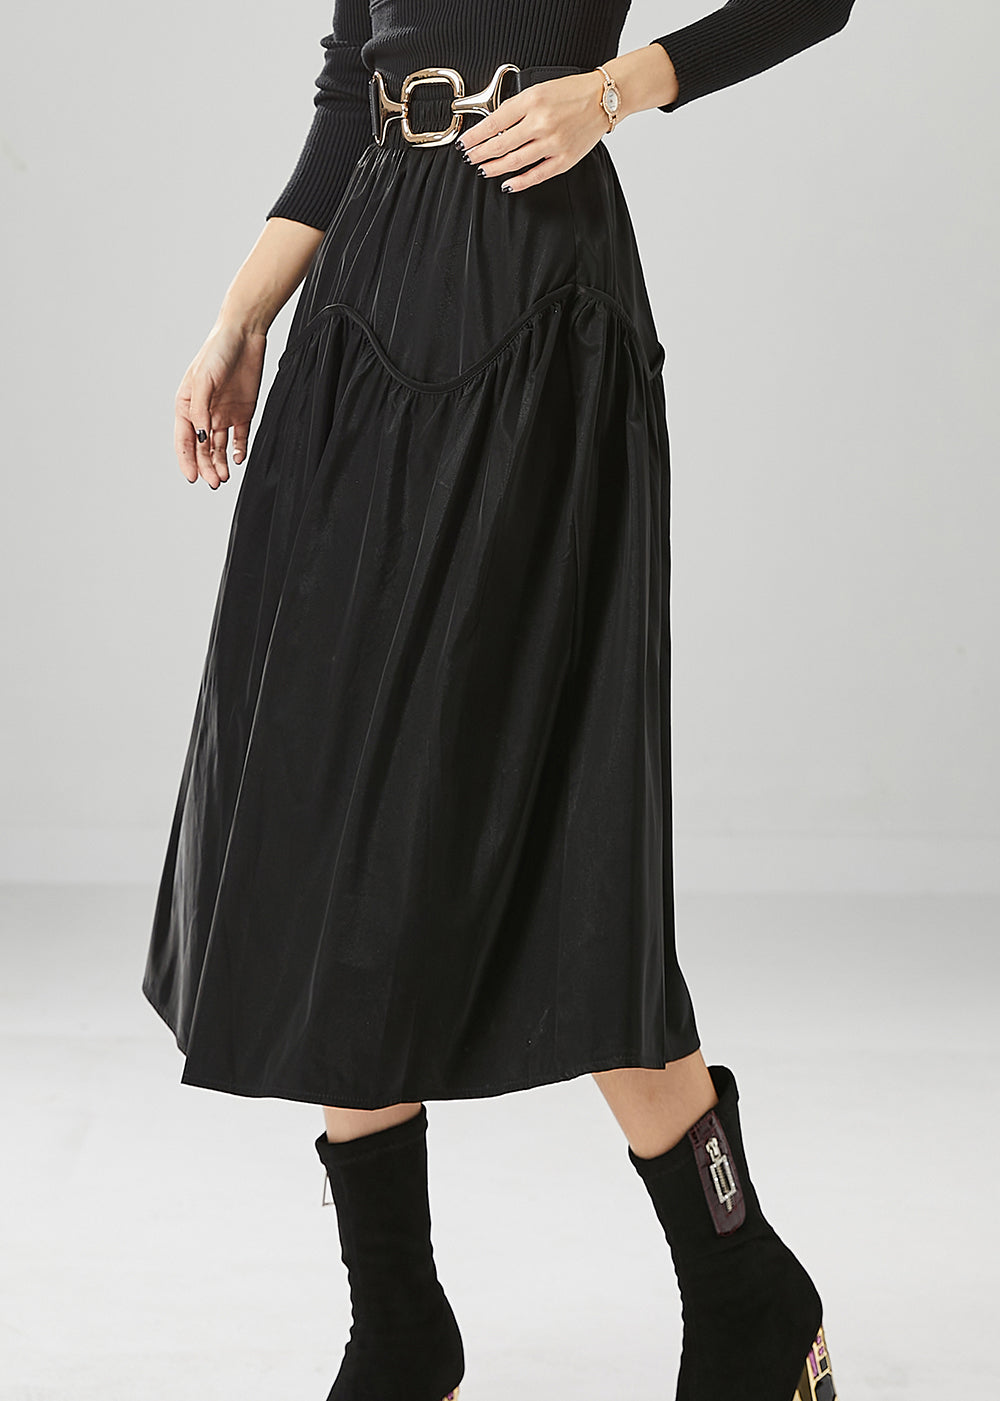 Chic Black Oversized Patchwork Cotton Skirts Fall